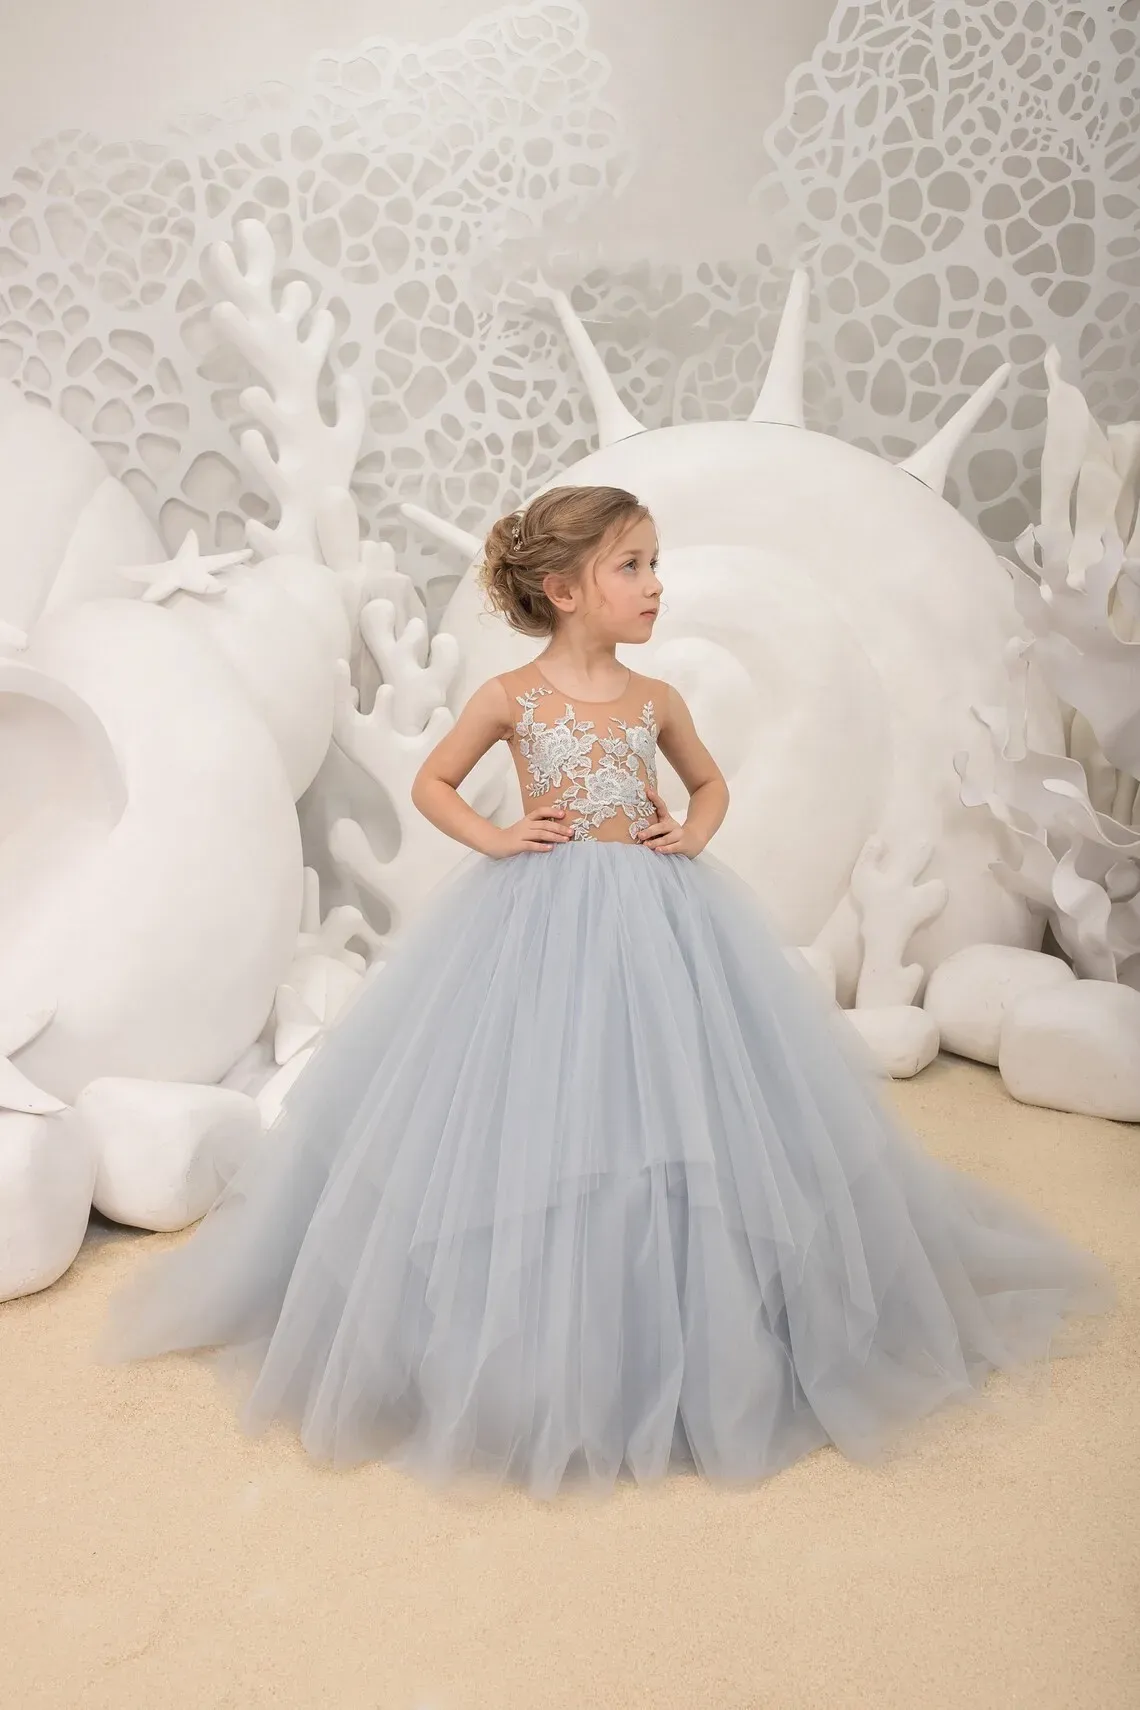 Vintage Long Dusty Blue Flower Girl Dresses Jewel Neck Tulle Sleeveless with Appliques Ball Gown Floor Length Custom Made for Wedding Party